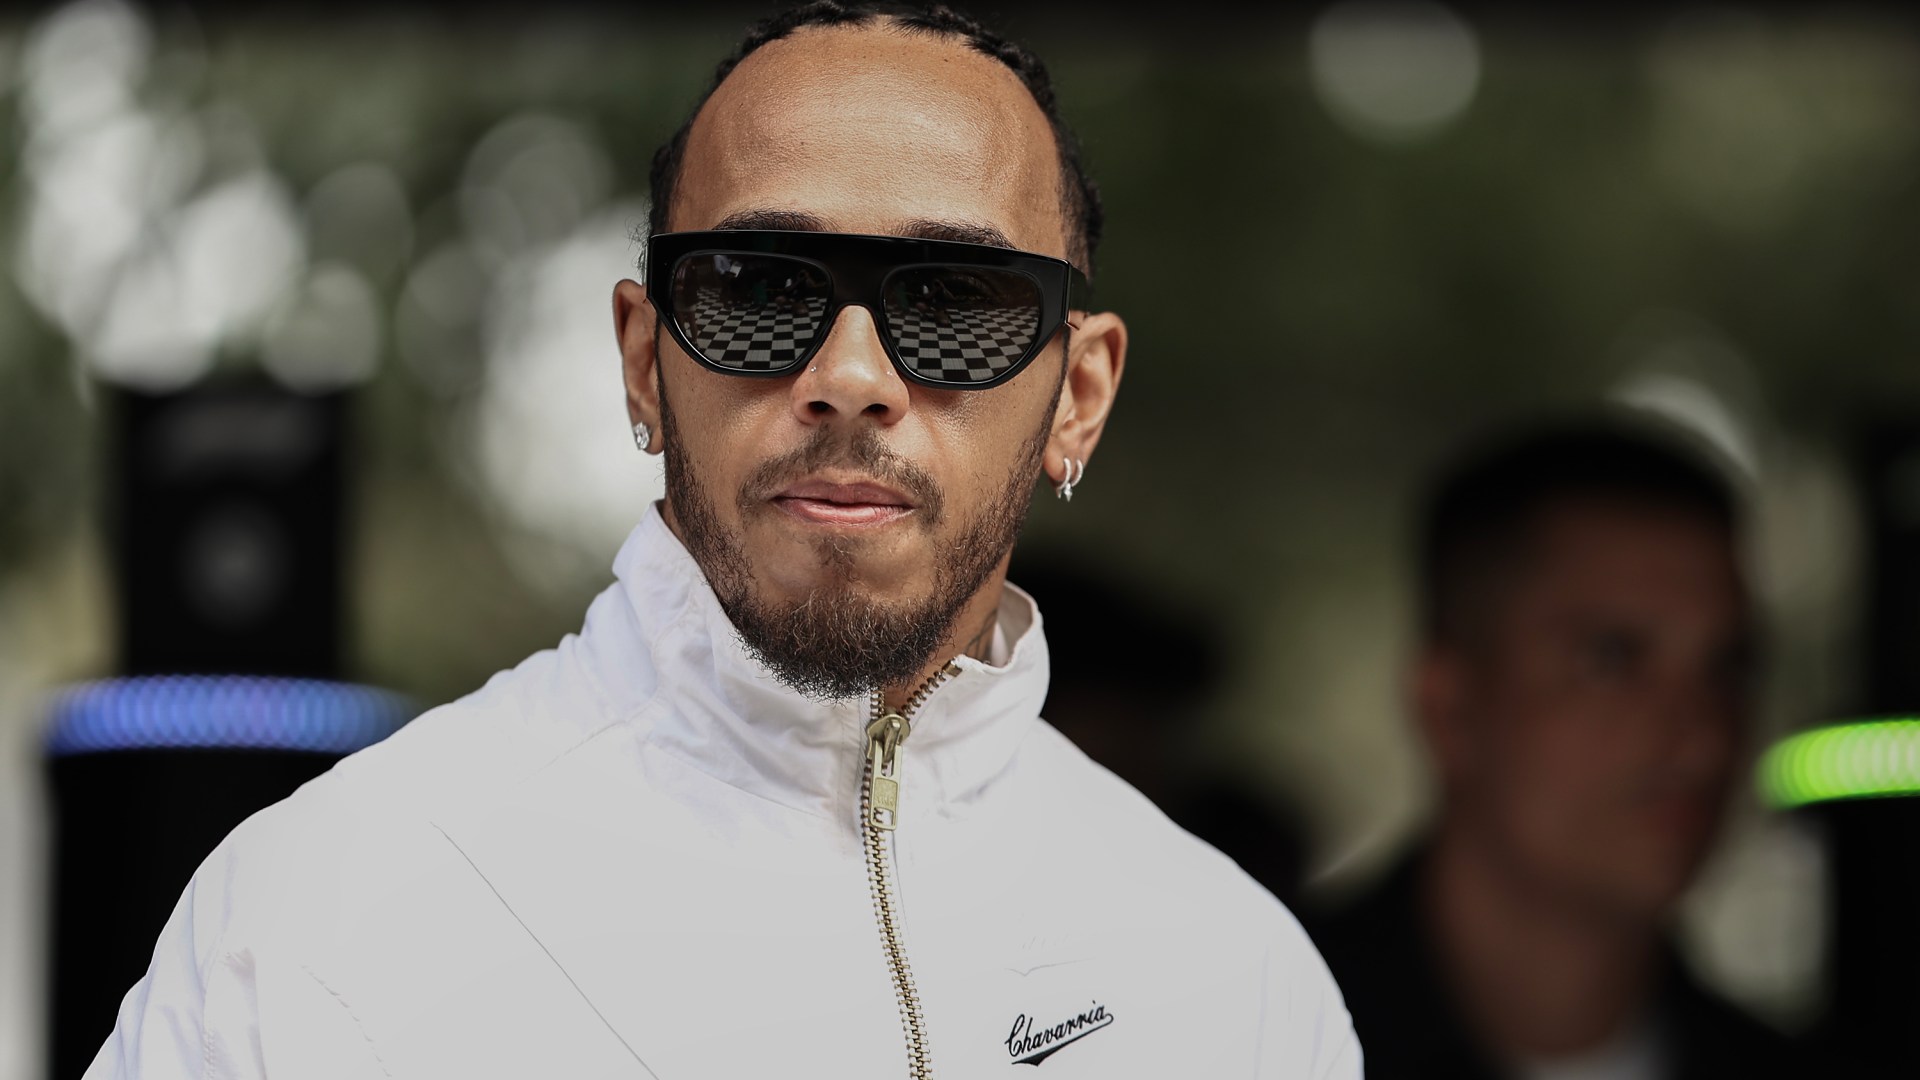 F1 legend, 36, breaks silence on shock retirement U-turn rumours to replace Lewis Hamilton at Mercedes